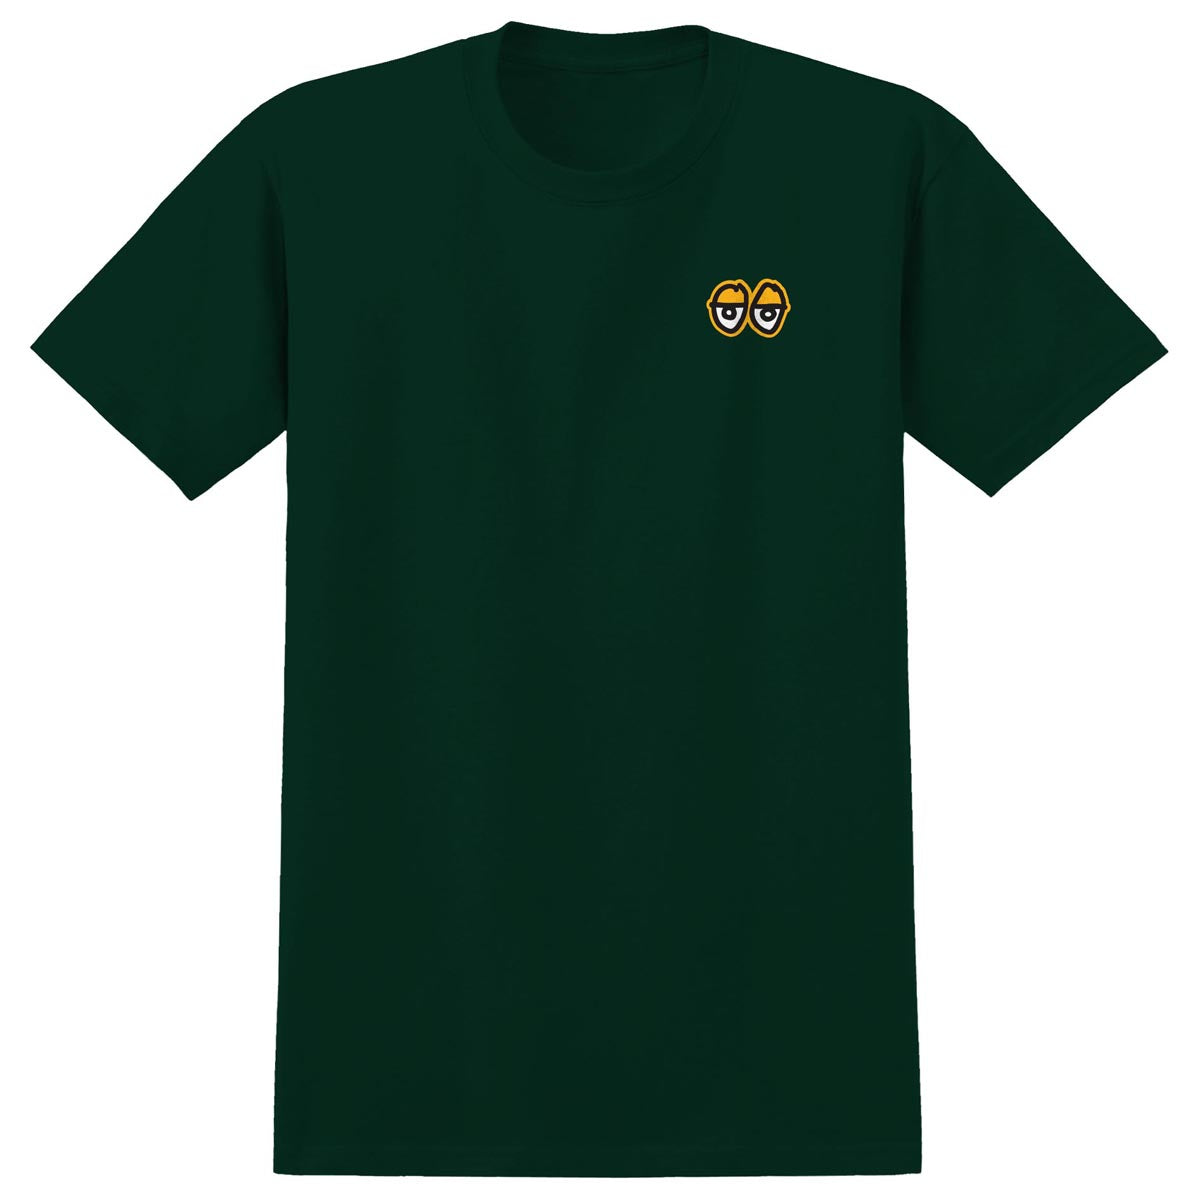 Krooked Strait Eyes T-Shirt - Forest Green/Gold image 2